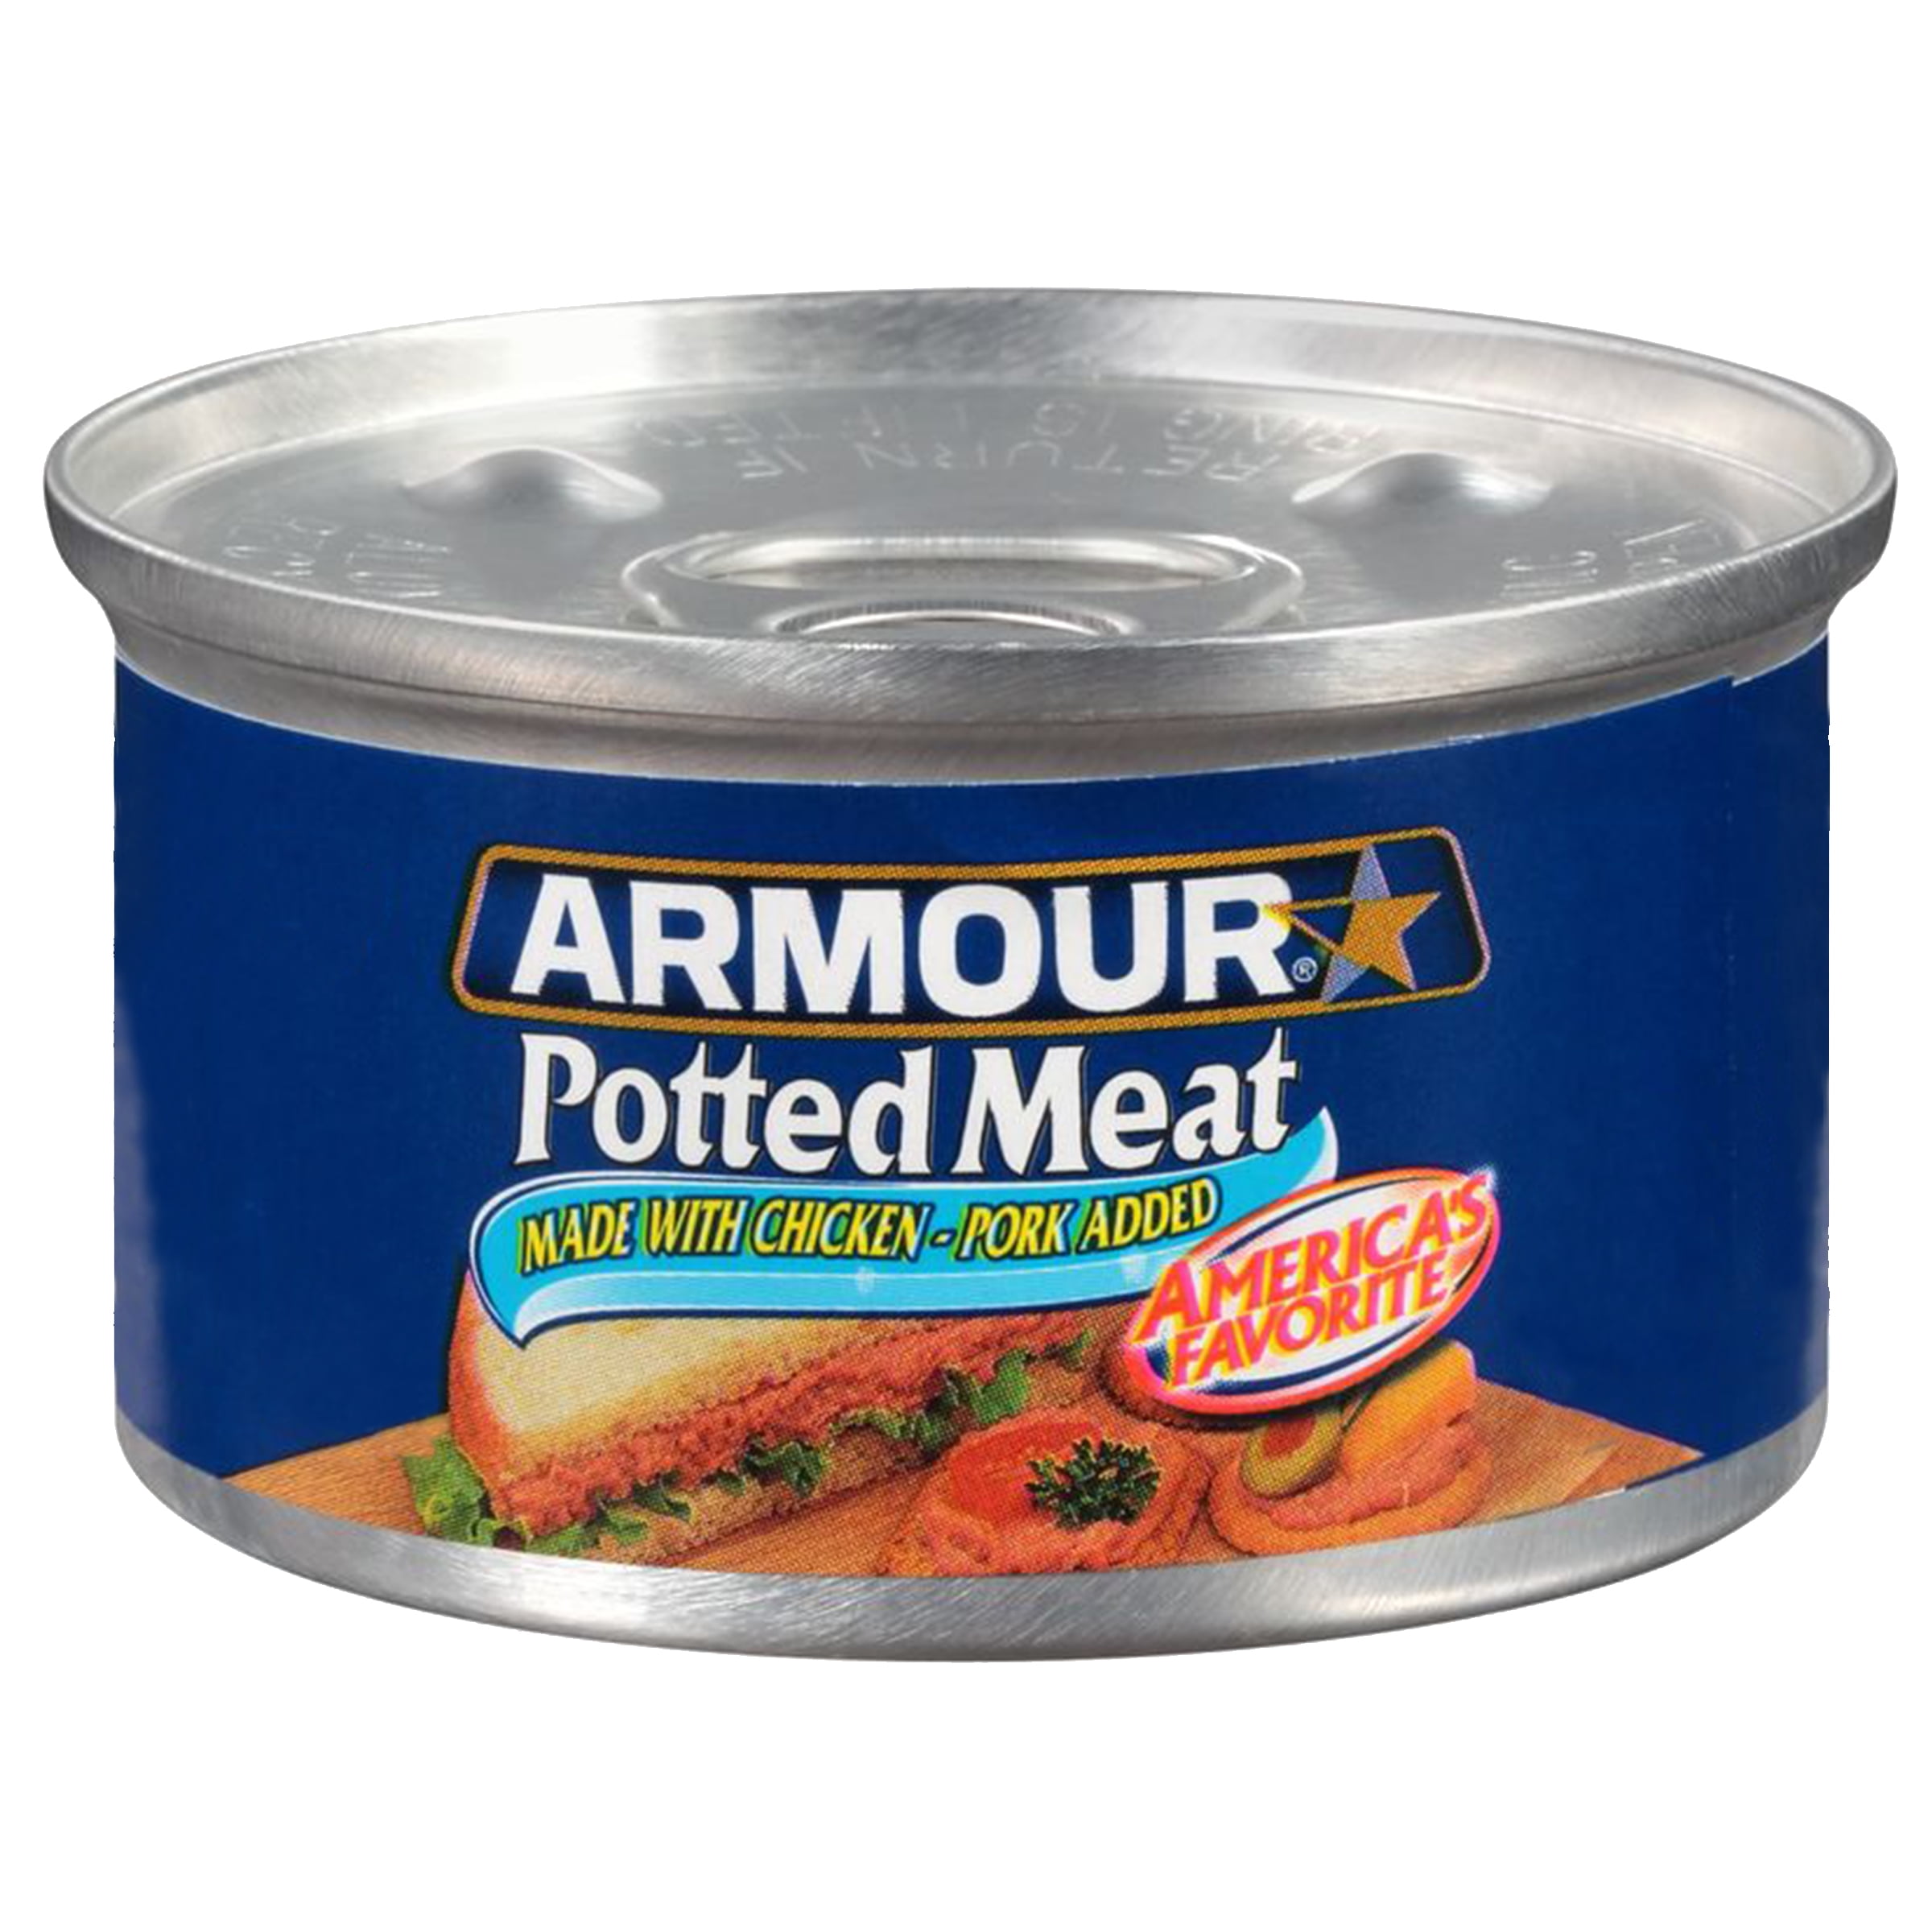 Potted meat. Canned meat. Meat Pot spotliatoes GHT 3. A can of meat. Made for meat